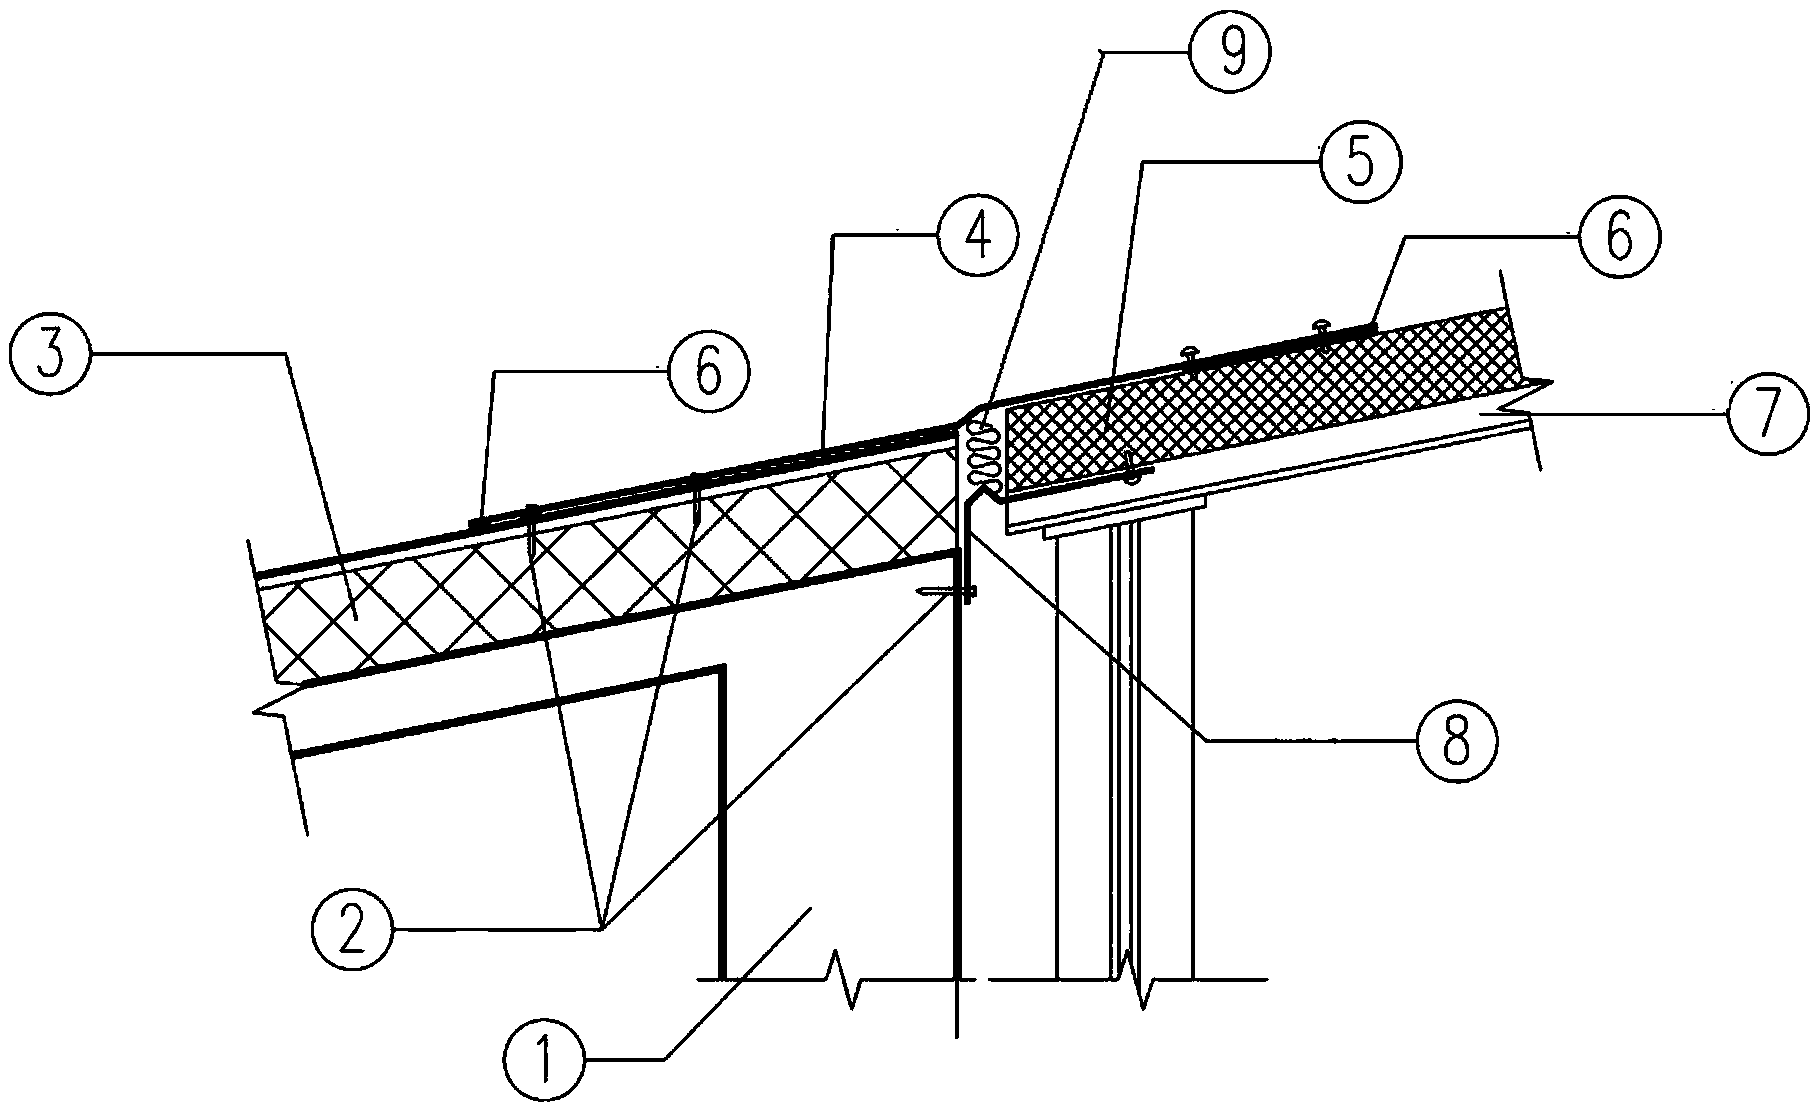 Deformable connection structure of concrete roof and metal plate roof